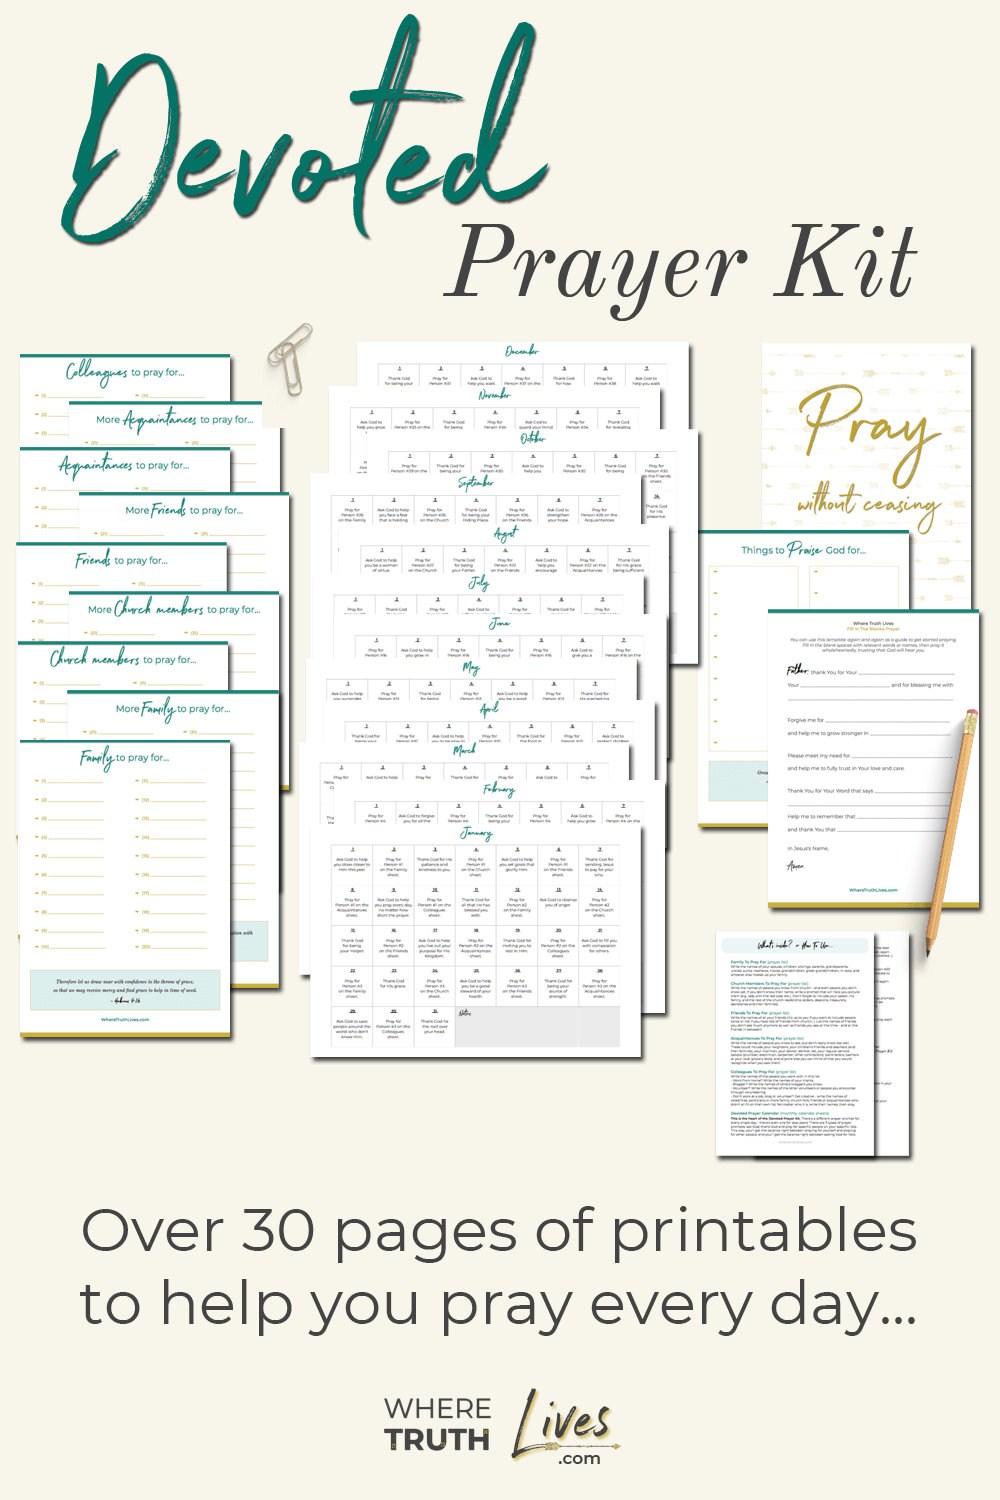 Struggle to pray consistently, daily or purposefully? Finally, there's a solution that will help you stay focused while praying, balance between thanksgiving and prayer requests, and establish a rock-solid routine of praying every day. Introducing: The Devoted Prayer Kit from WhereTruthLives.com. Over 30 pages of printables to help you pray every day. No more struggling to find time, focus or topics. Simply print, and systematically pray.